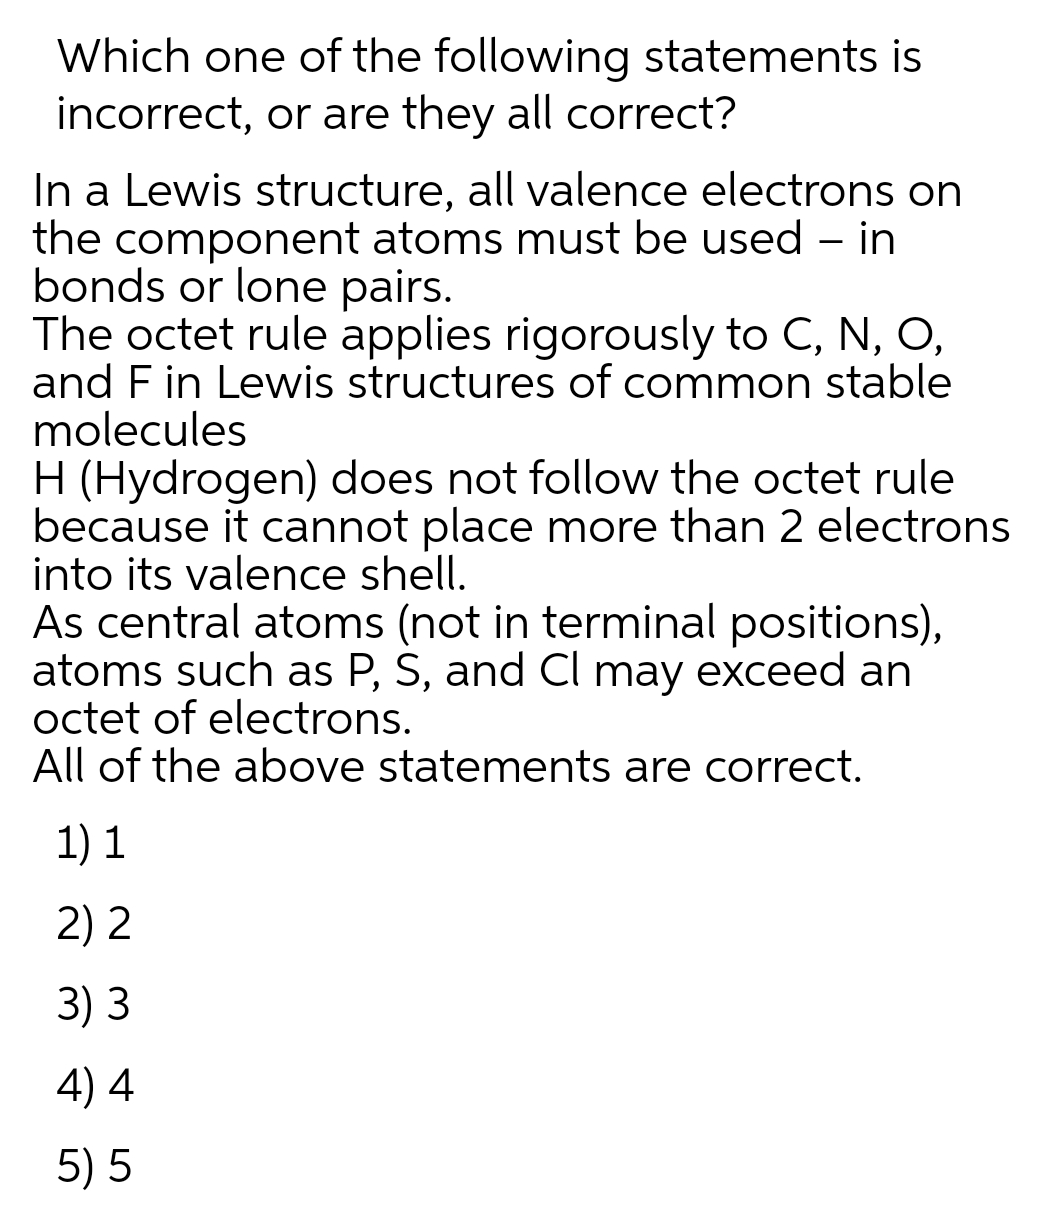 Which one of the following statements is
incorrect, or are they all correct?
In a Lewis structure, all valence electrons on
the component atoms must be used – in
bonds or lone pairs.
The octet rule applies rigorously to C, N, O,
and F in Lewis structures of common stable
molecules
H (Hydrogen) does not follow the octet rule
because it cannot place more than 2 electrons
into its valence shell.
As central atoms (not in terminal positions),
atoms such as P, S, and Cl may exceed an
octet of electrons.
All of the above statements are correct.
1) 1
2) 2
3) 3
4) 4
5) 5
